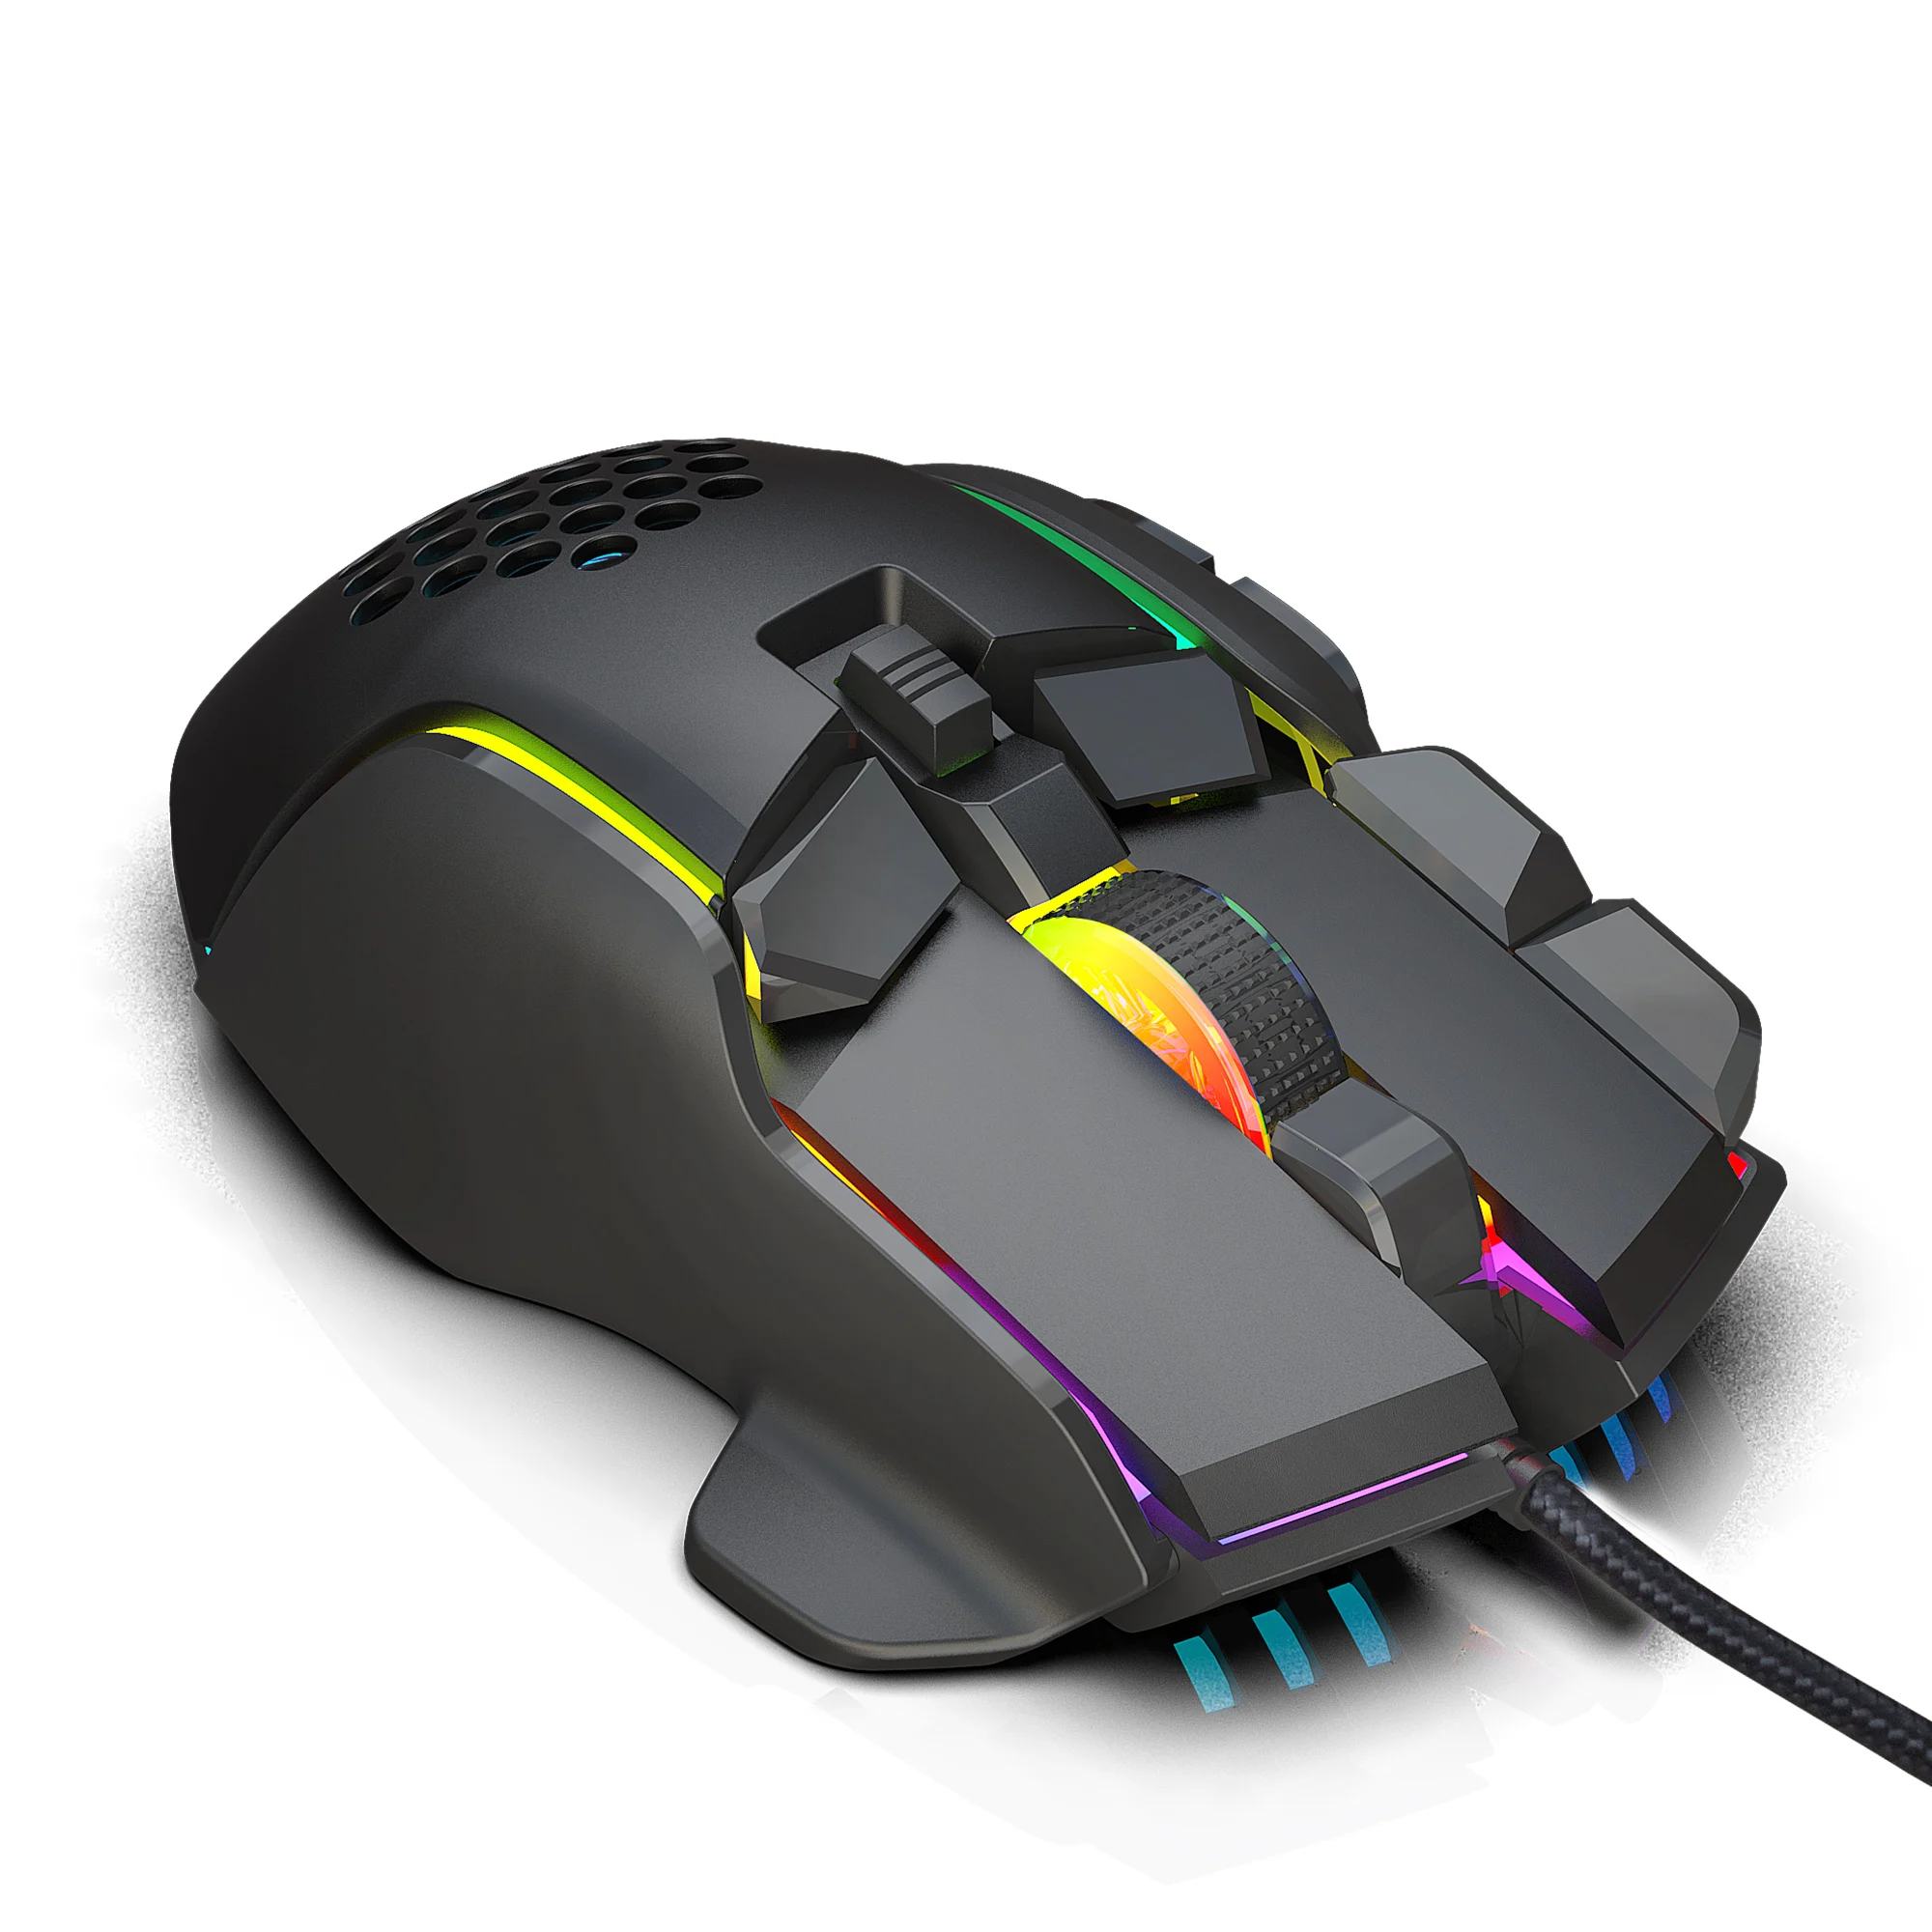 Hi, I recently bought this mouse but can't find its software to customize  it, can anyone help? the mouse is called HXSJ X600 Programming Gaming Mouse  USB Wired Gaming Mouse RGB Lighting